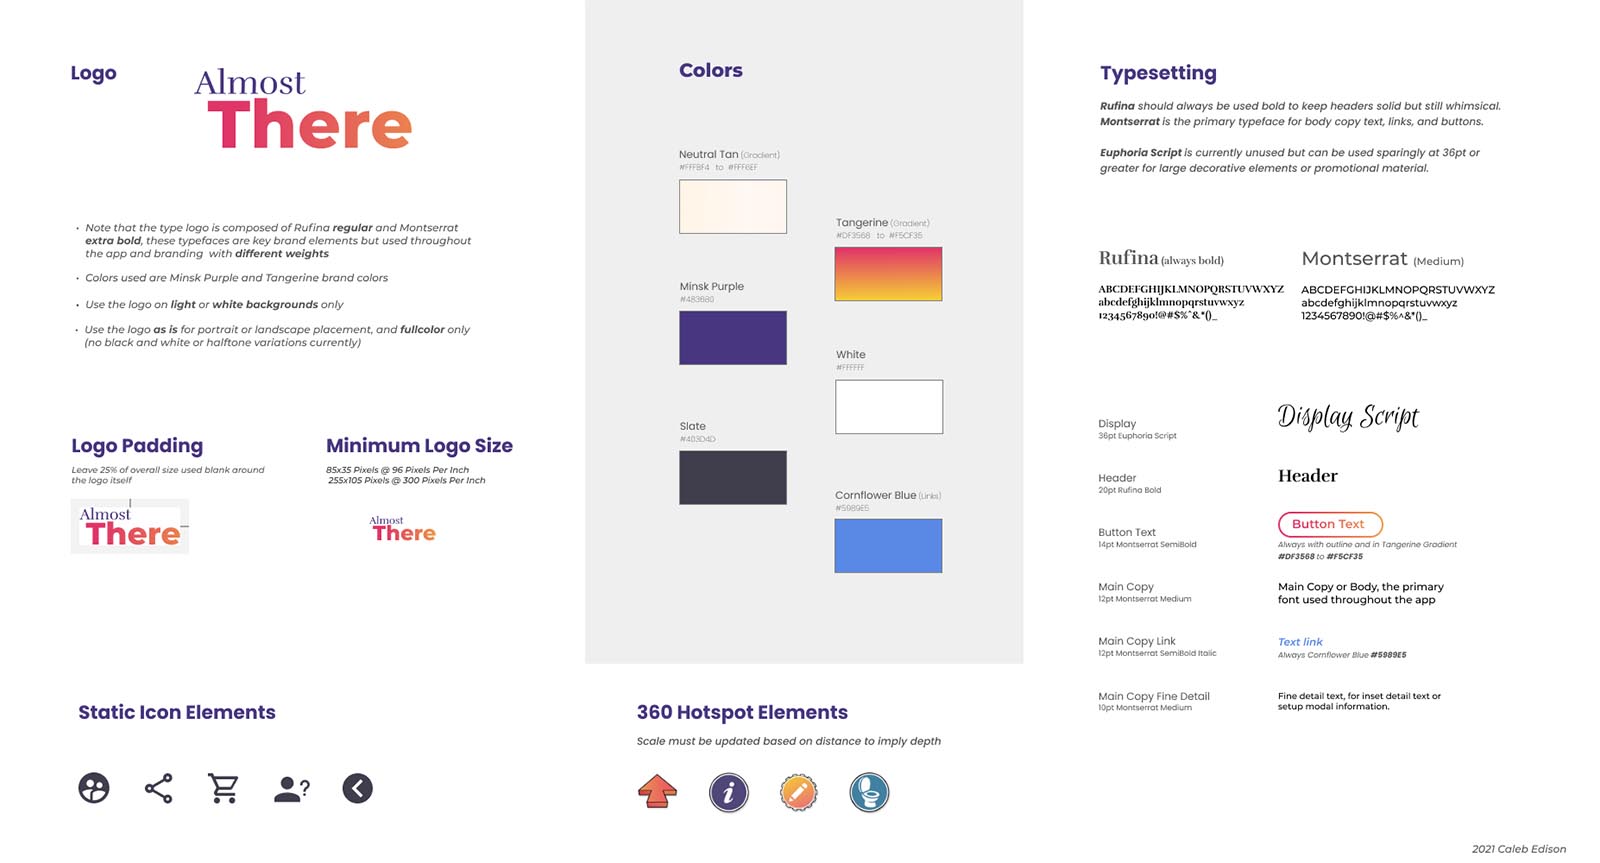 Brand Style Guide, including logo,colors, fonts and typefaces, and iconography.